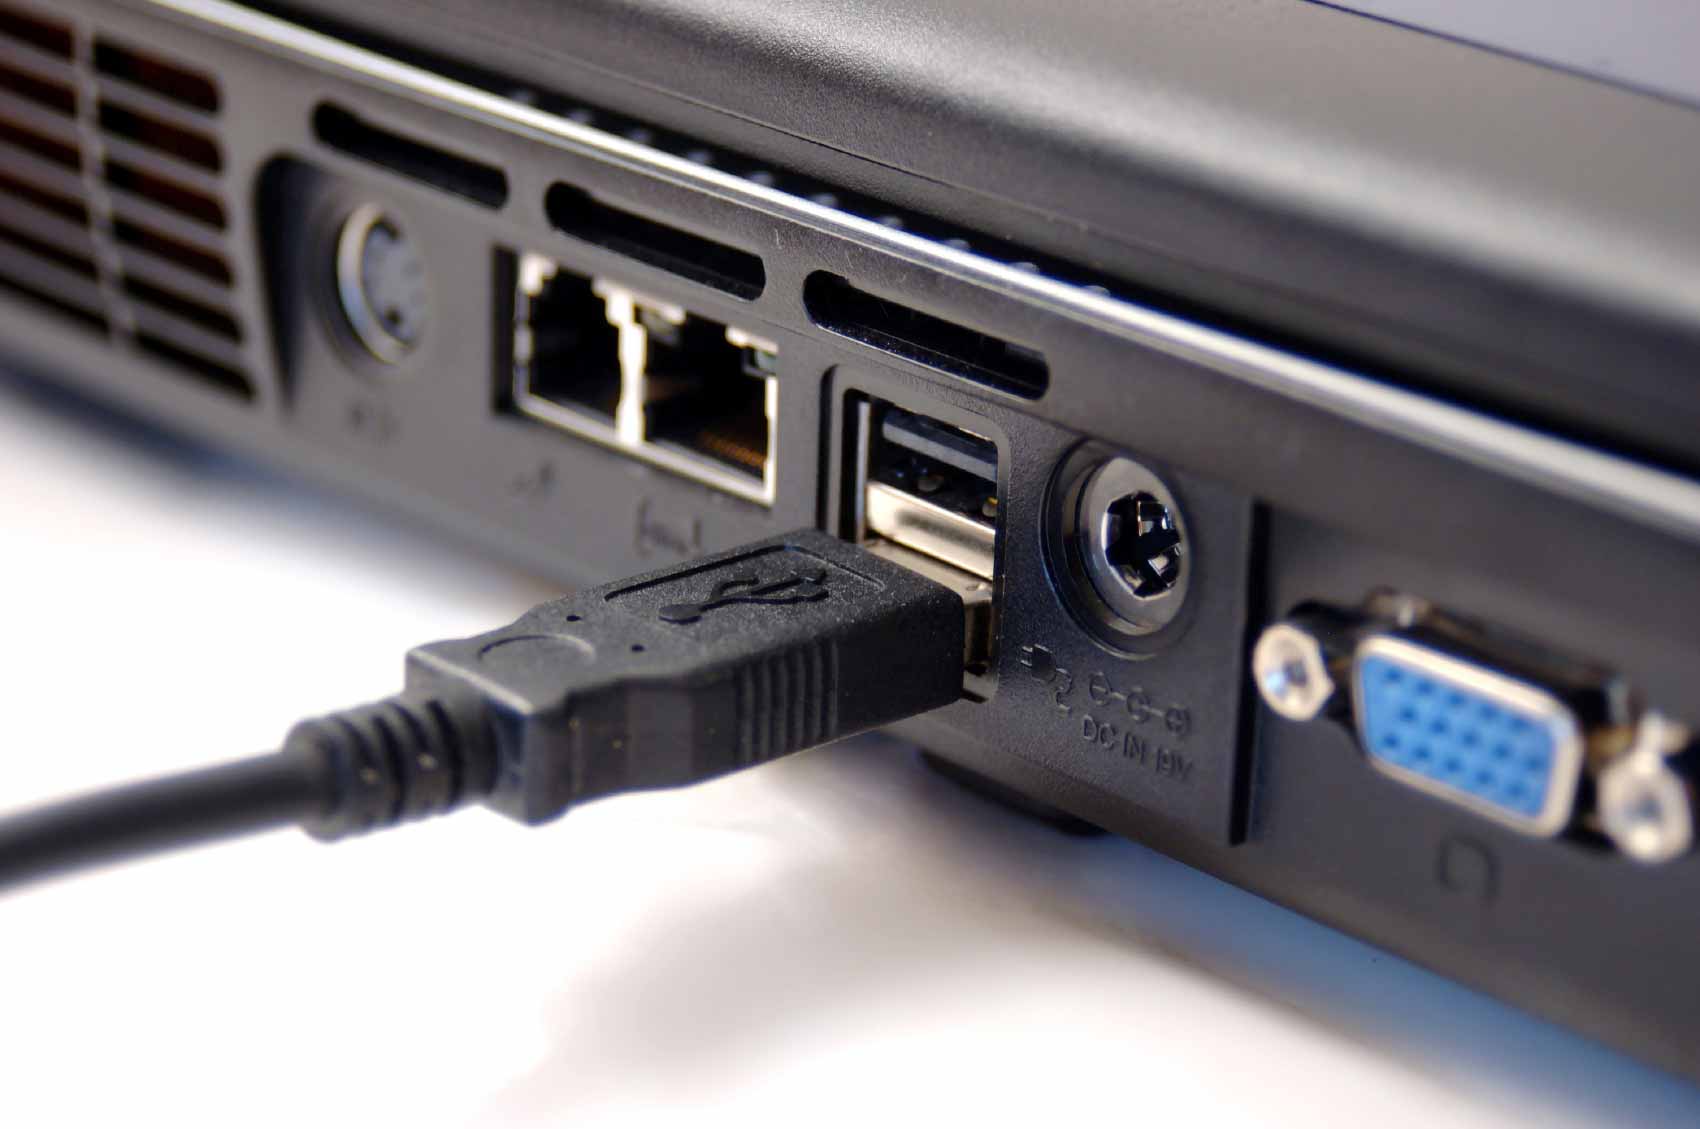 What Is A USB Port And How Can You Use It?